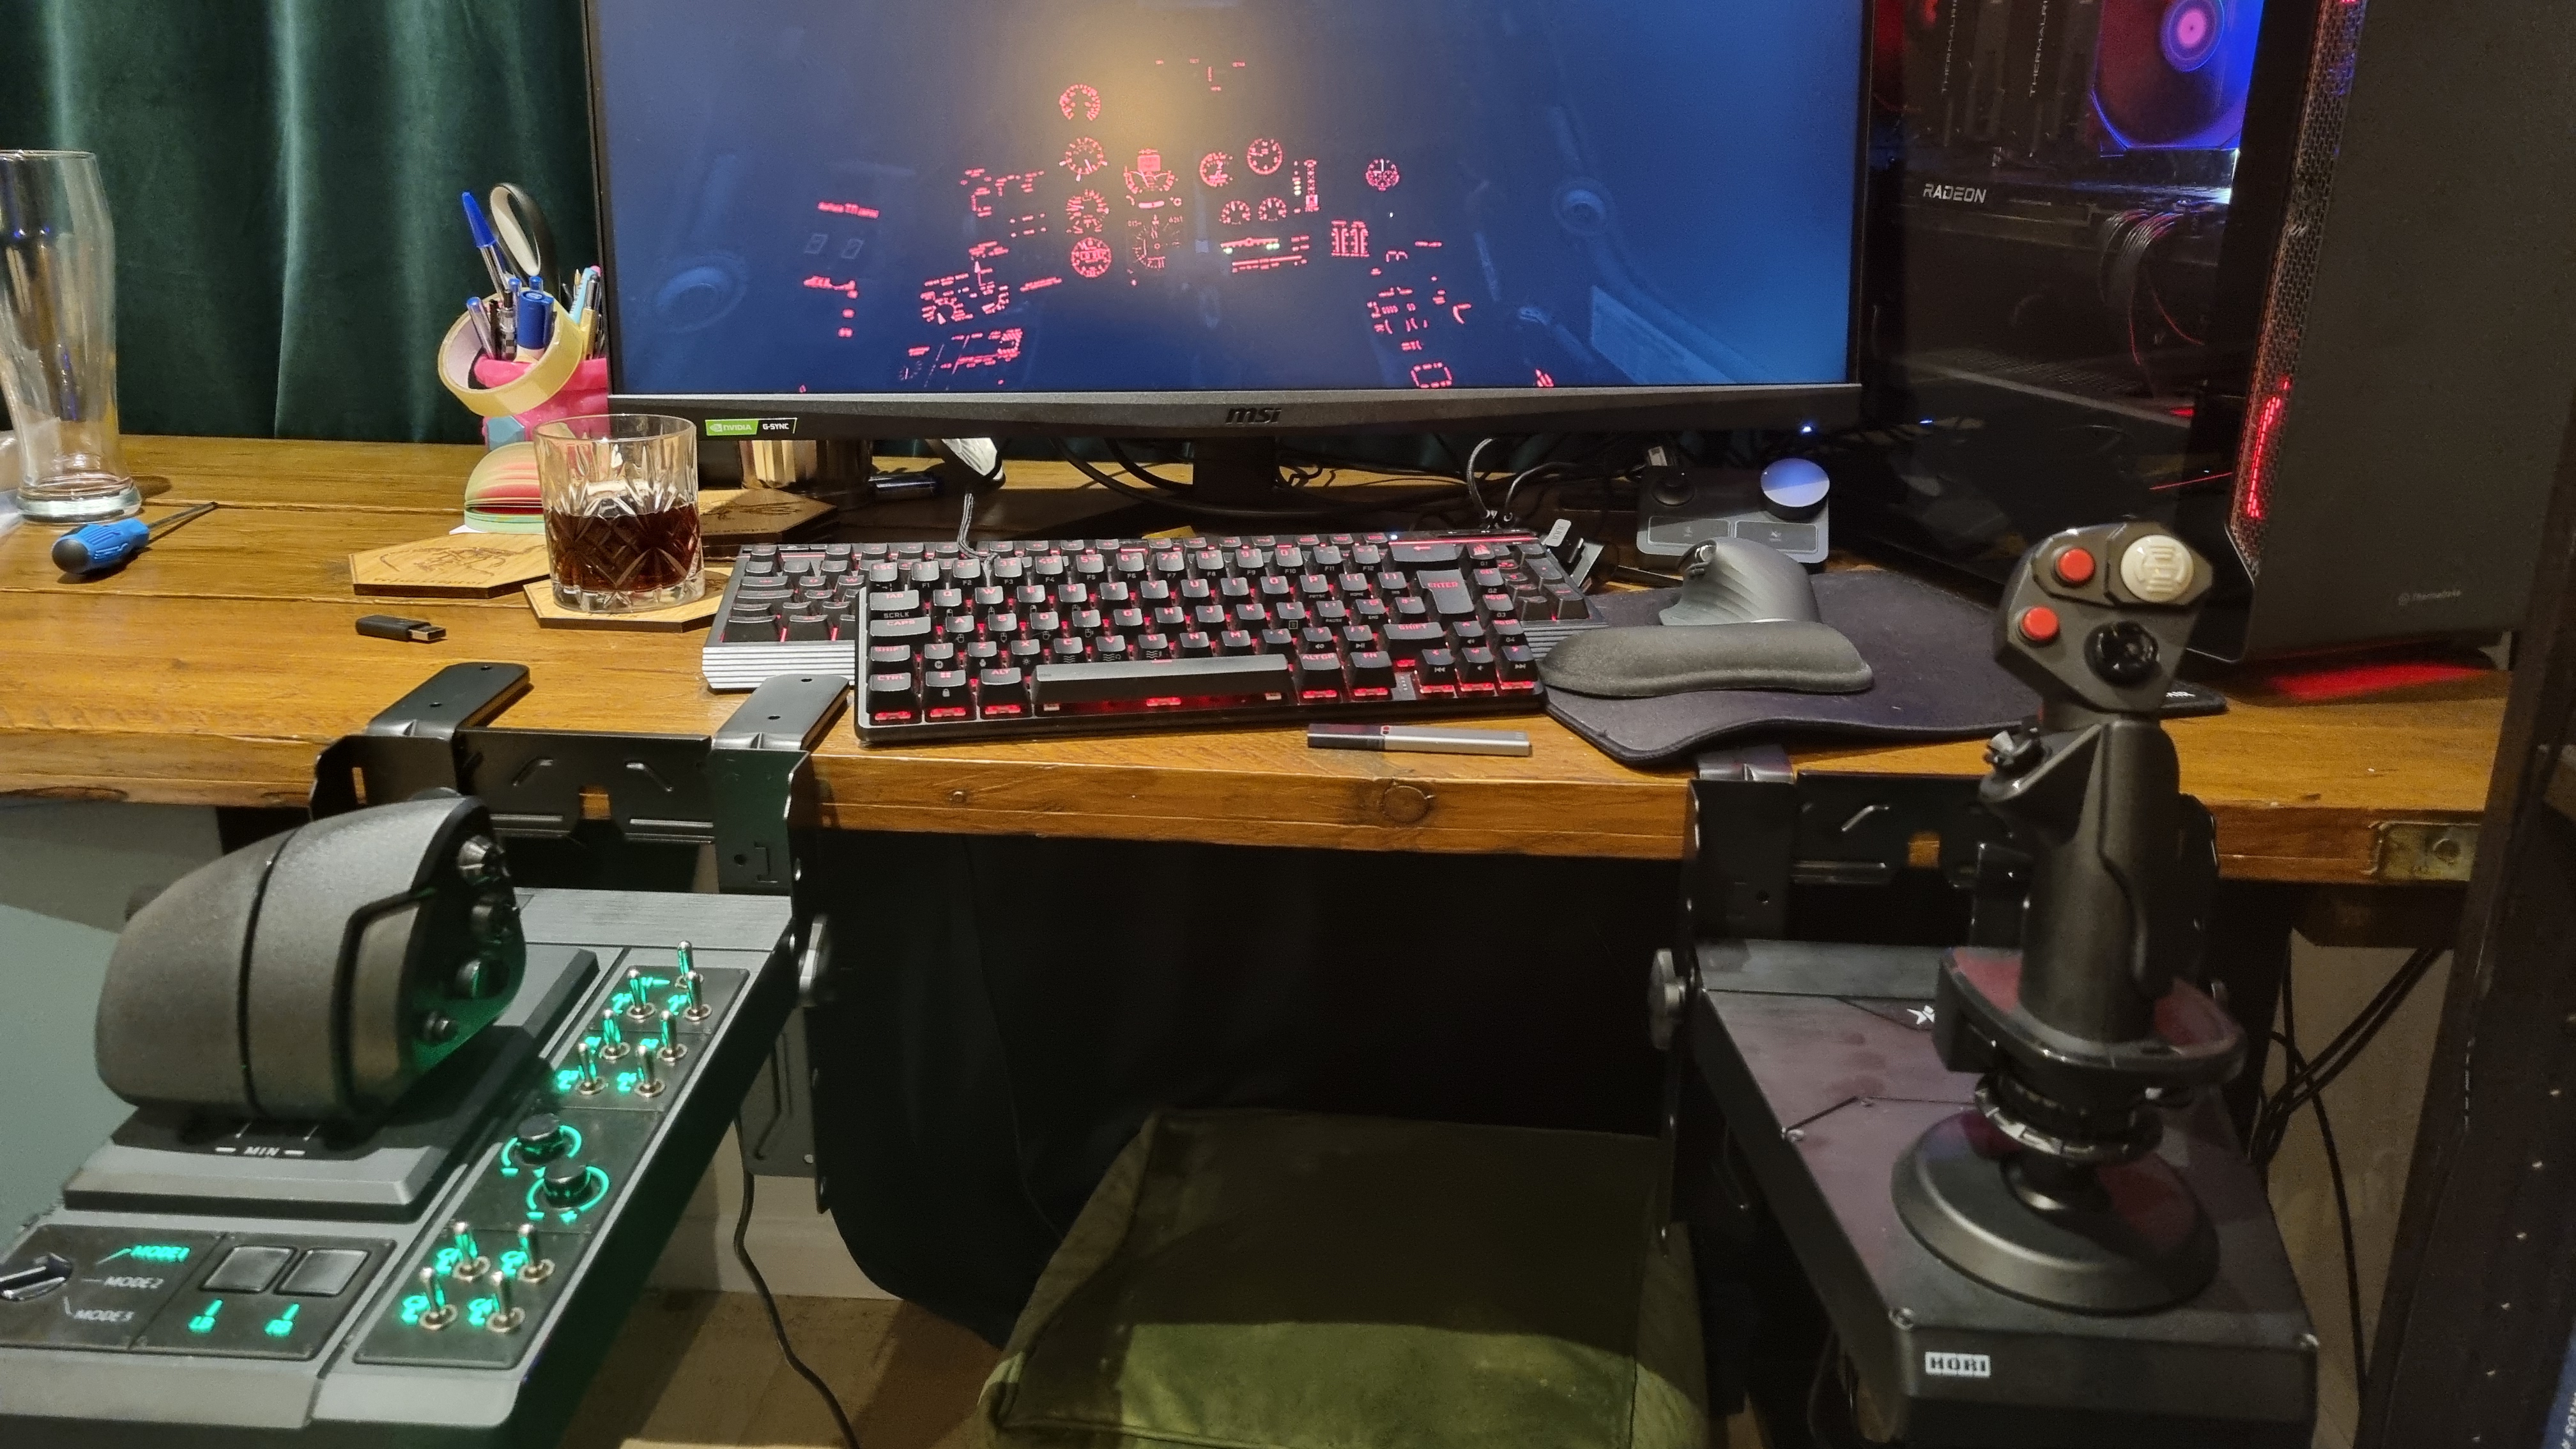 The Hori HOTAS flight control system mounted to a desk and playing DCS World